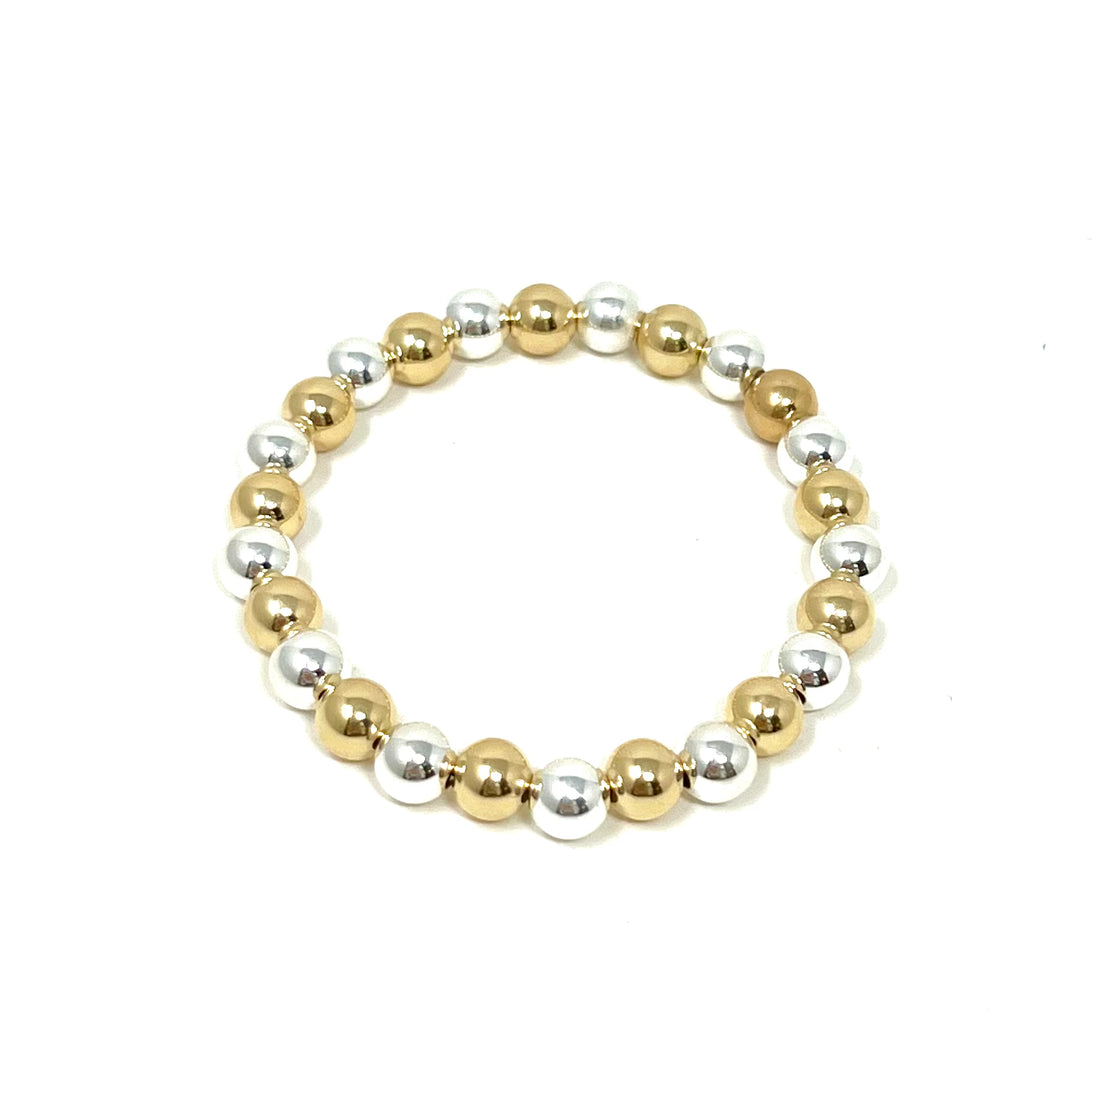 Large Ball Bracelet in Alternating Silver and Gold